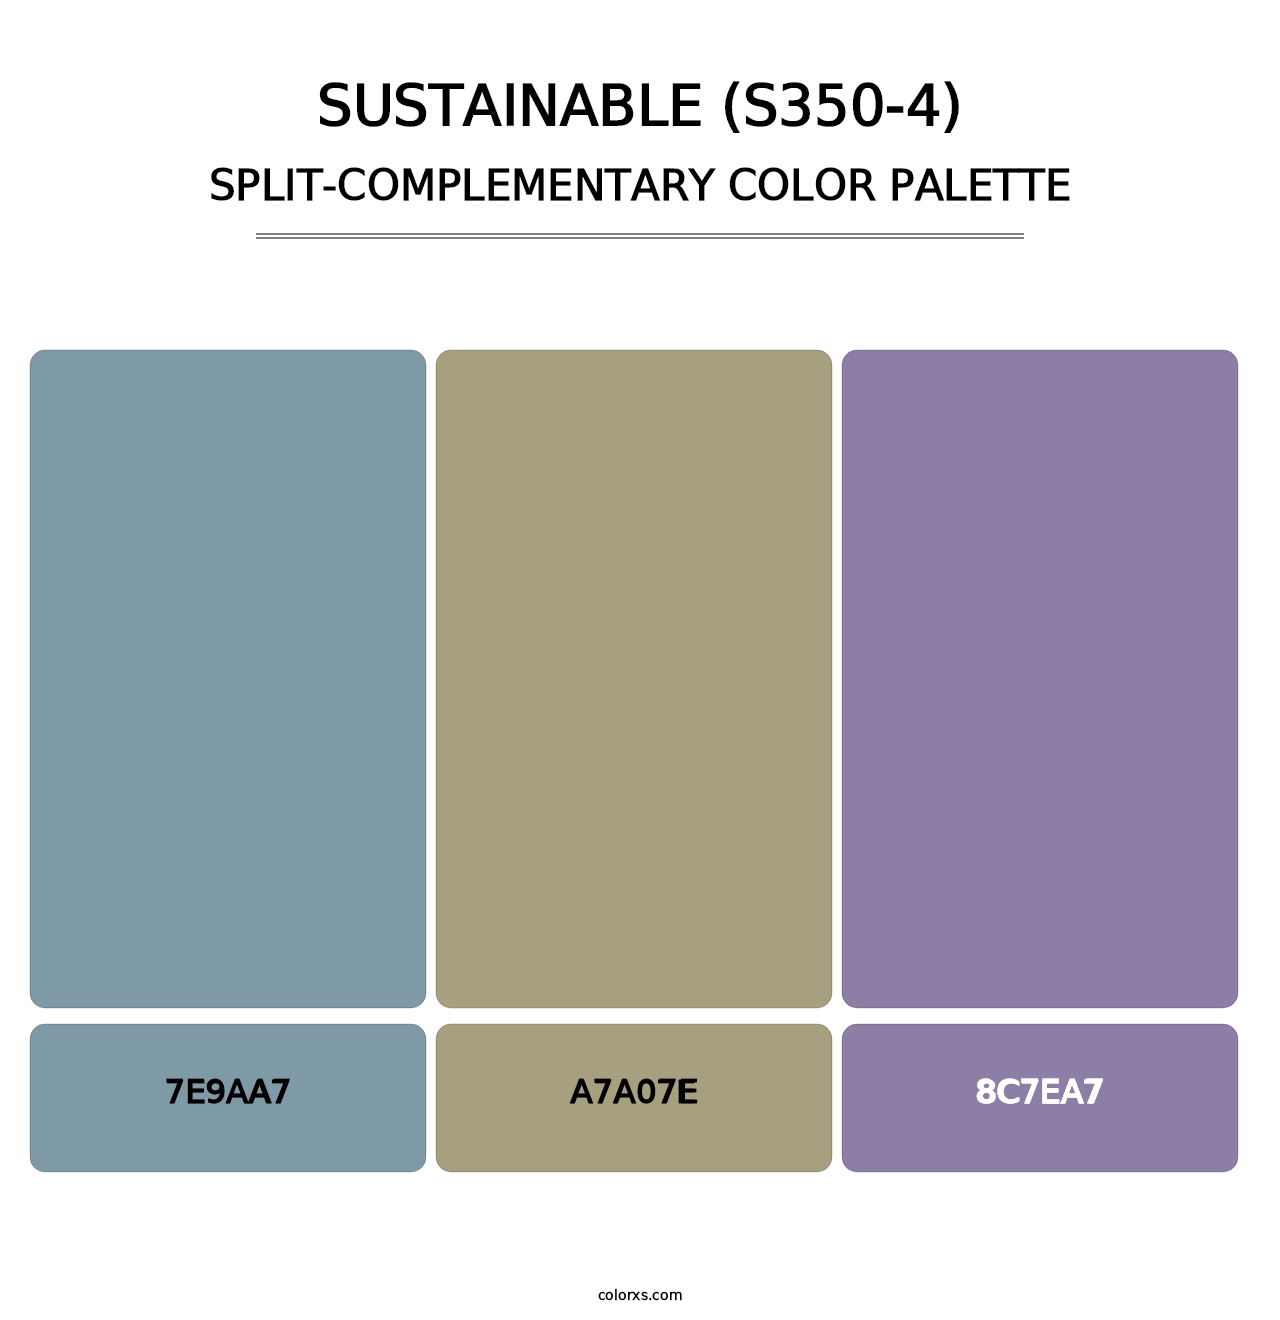 Sustainable (S350-4) - Split-Complementary Color Palette